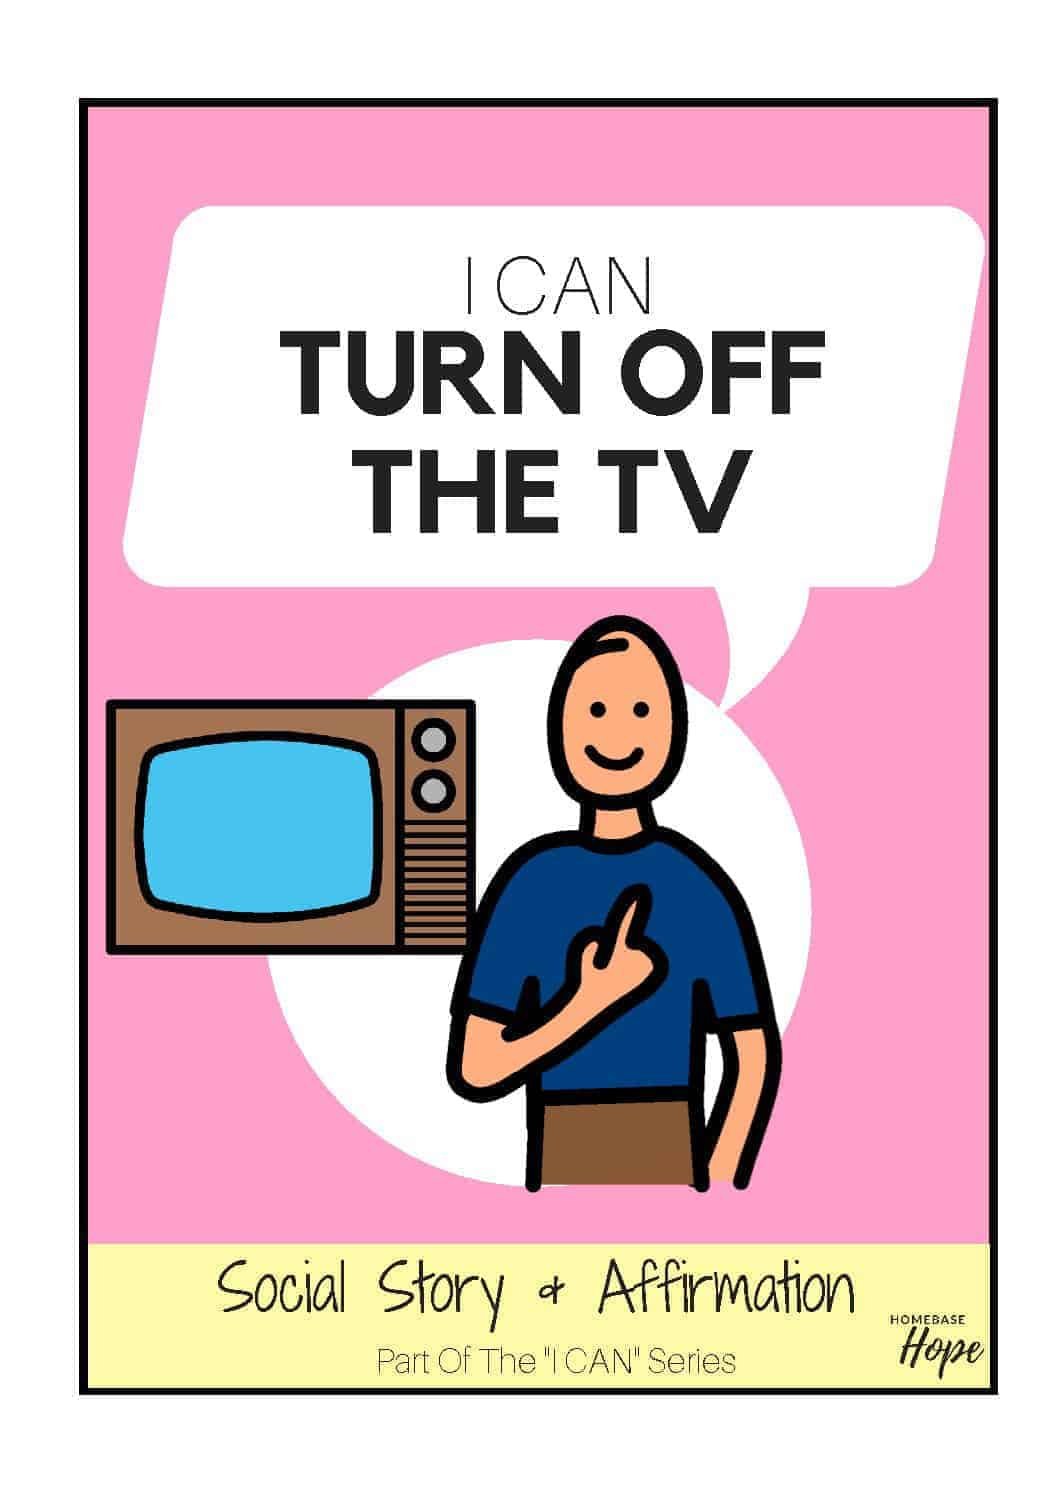 Can you turn off tv. Turn off the TV. Can you turn on the TV. Turning off.